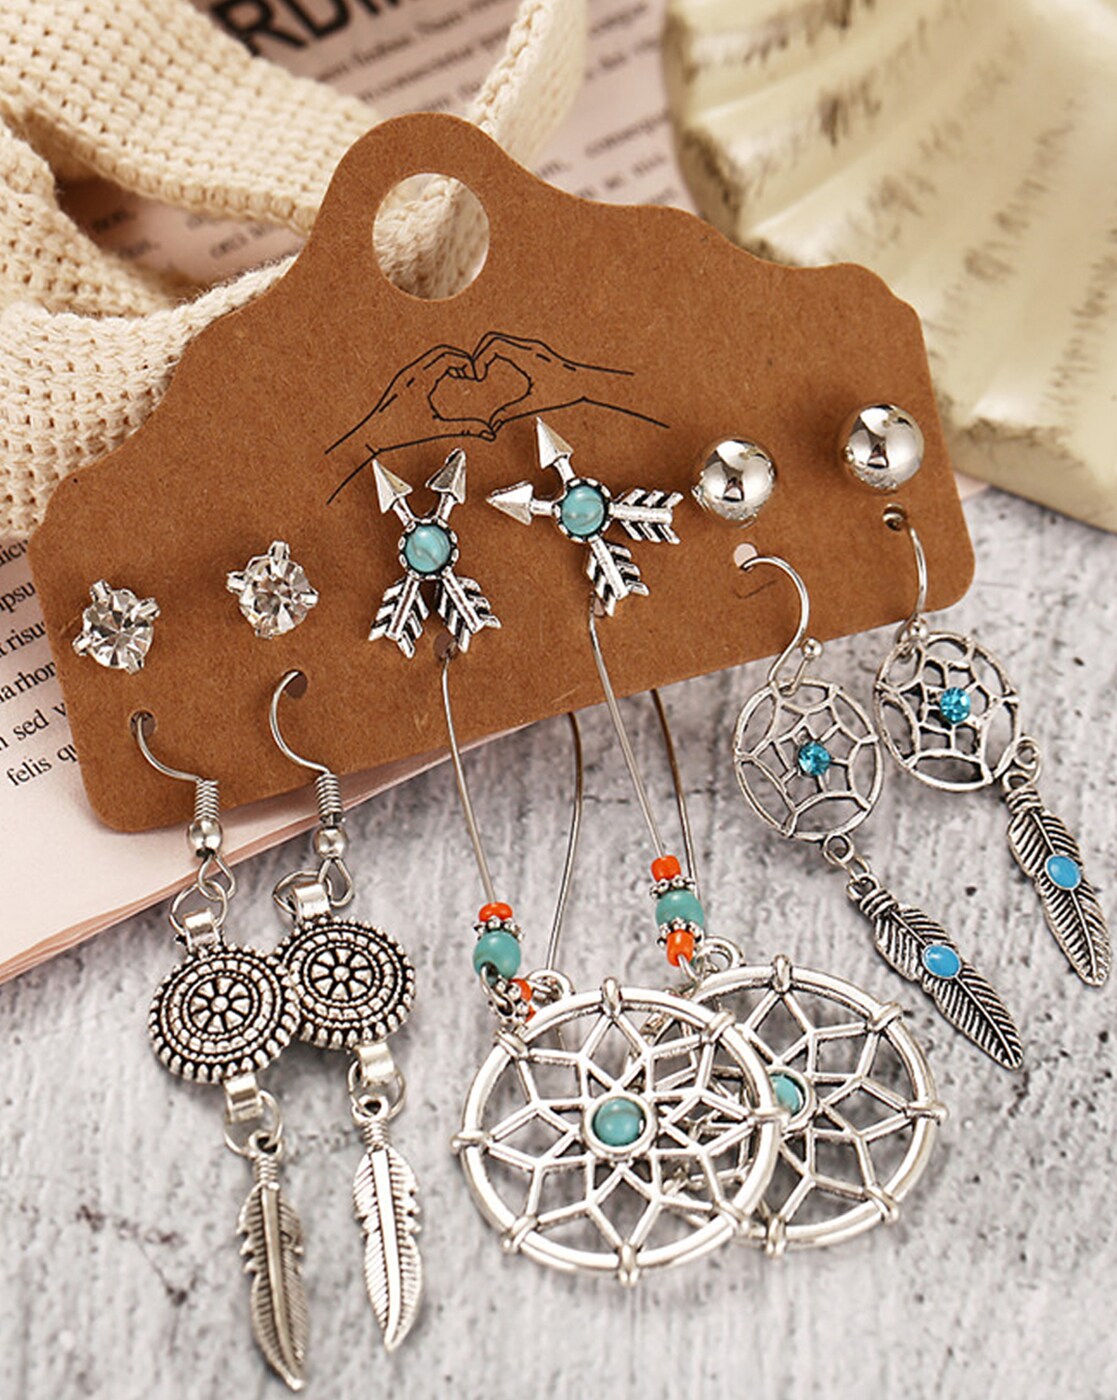 Premium Photo  Earrings of handmade dream catcher with feathers threads  and beads rope hanging